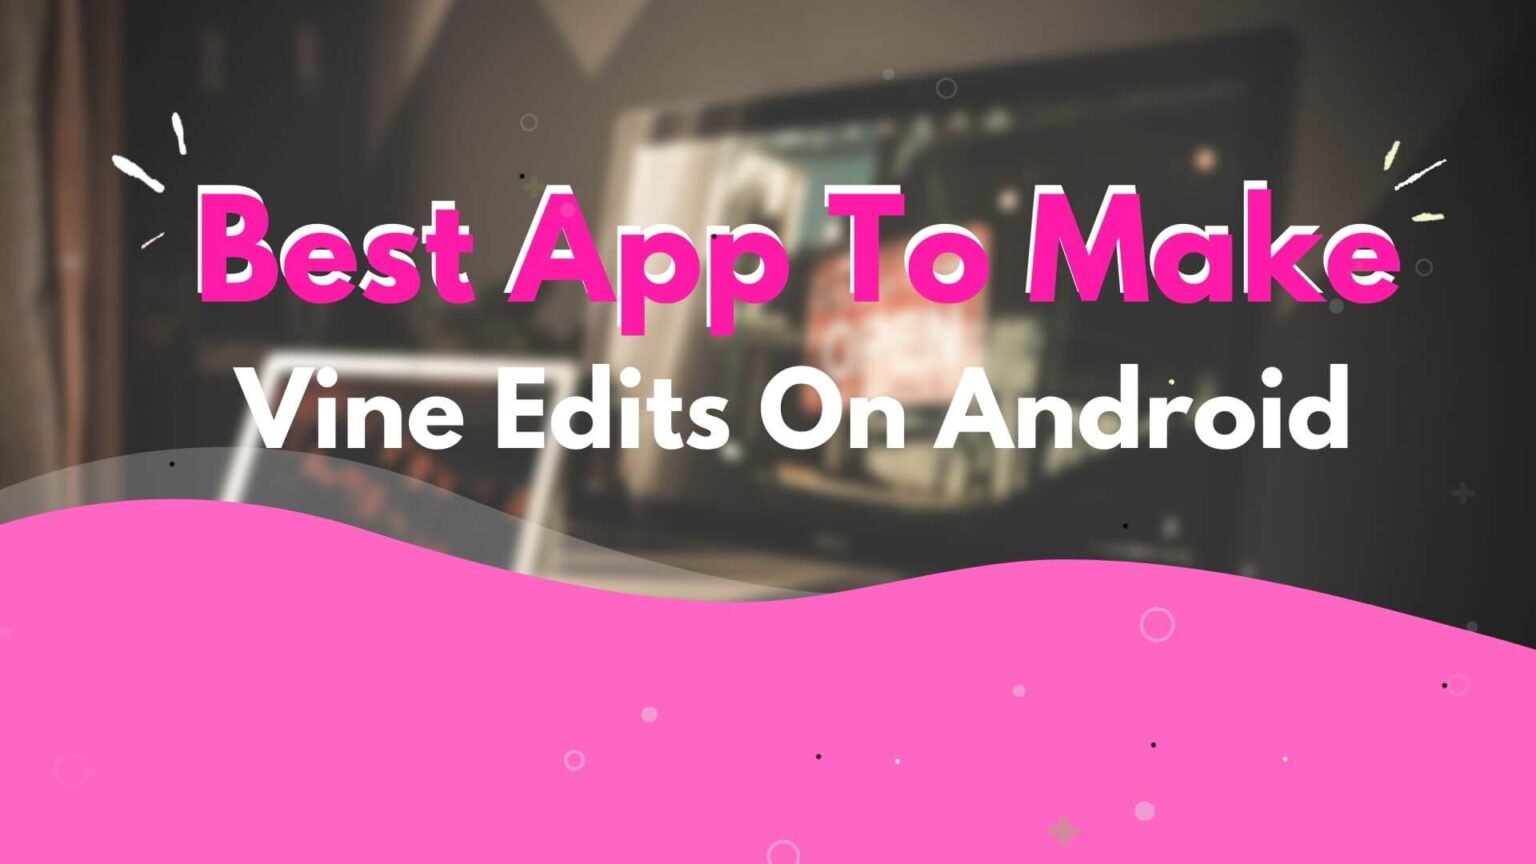 Best App To Make Vine Edits On Android 2022 oHee